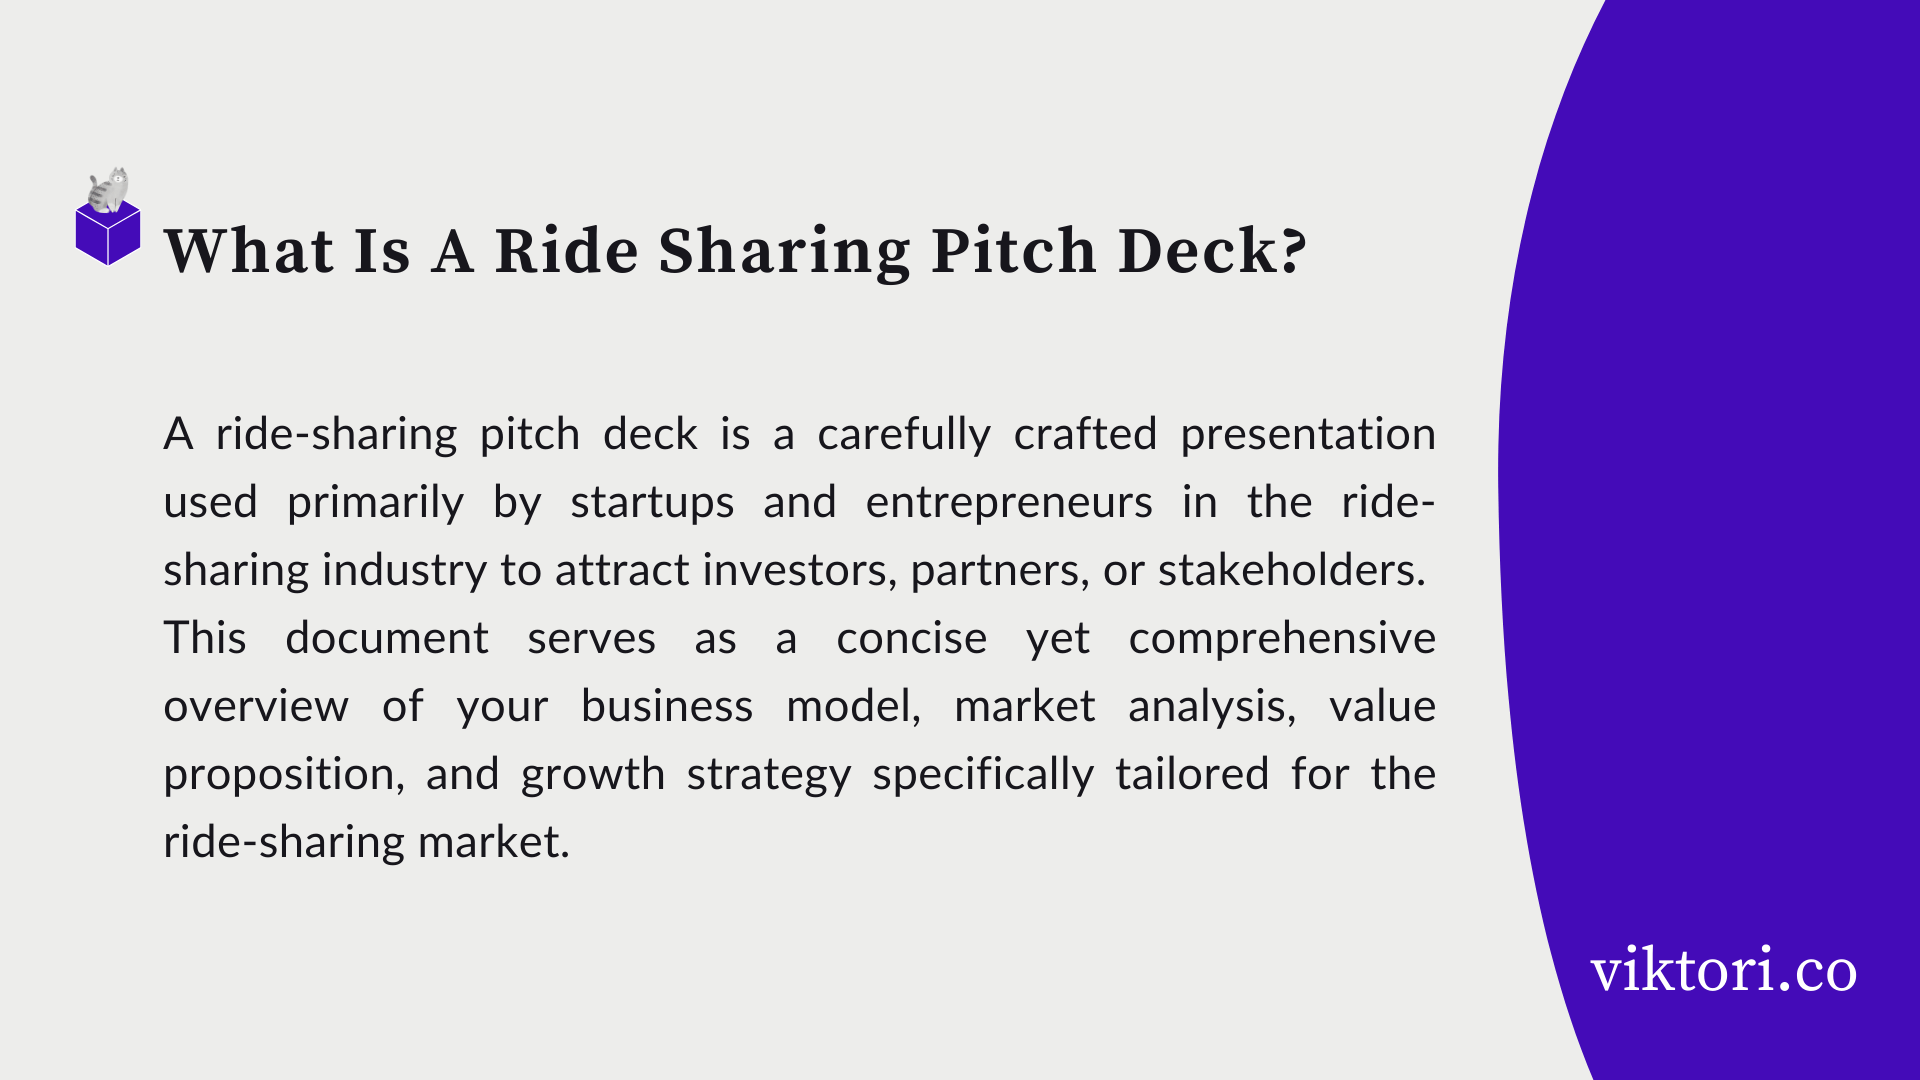 ride sharing pitch deck definition